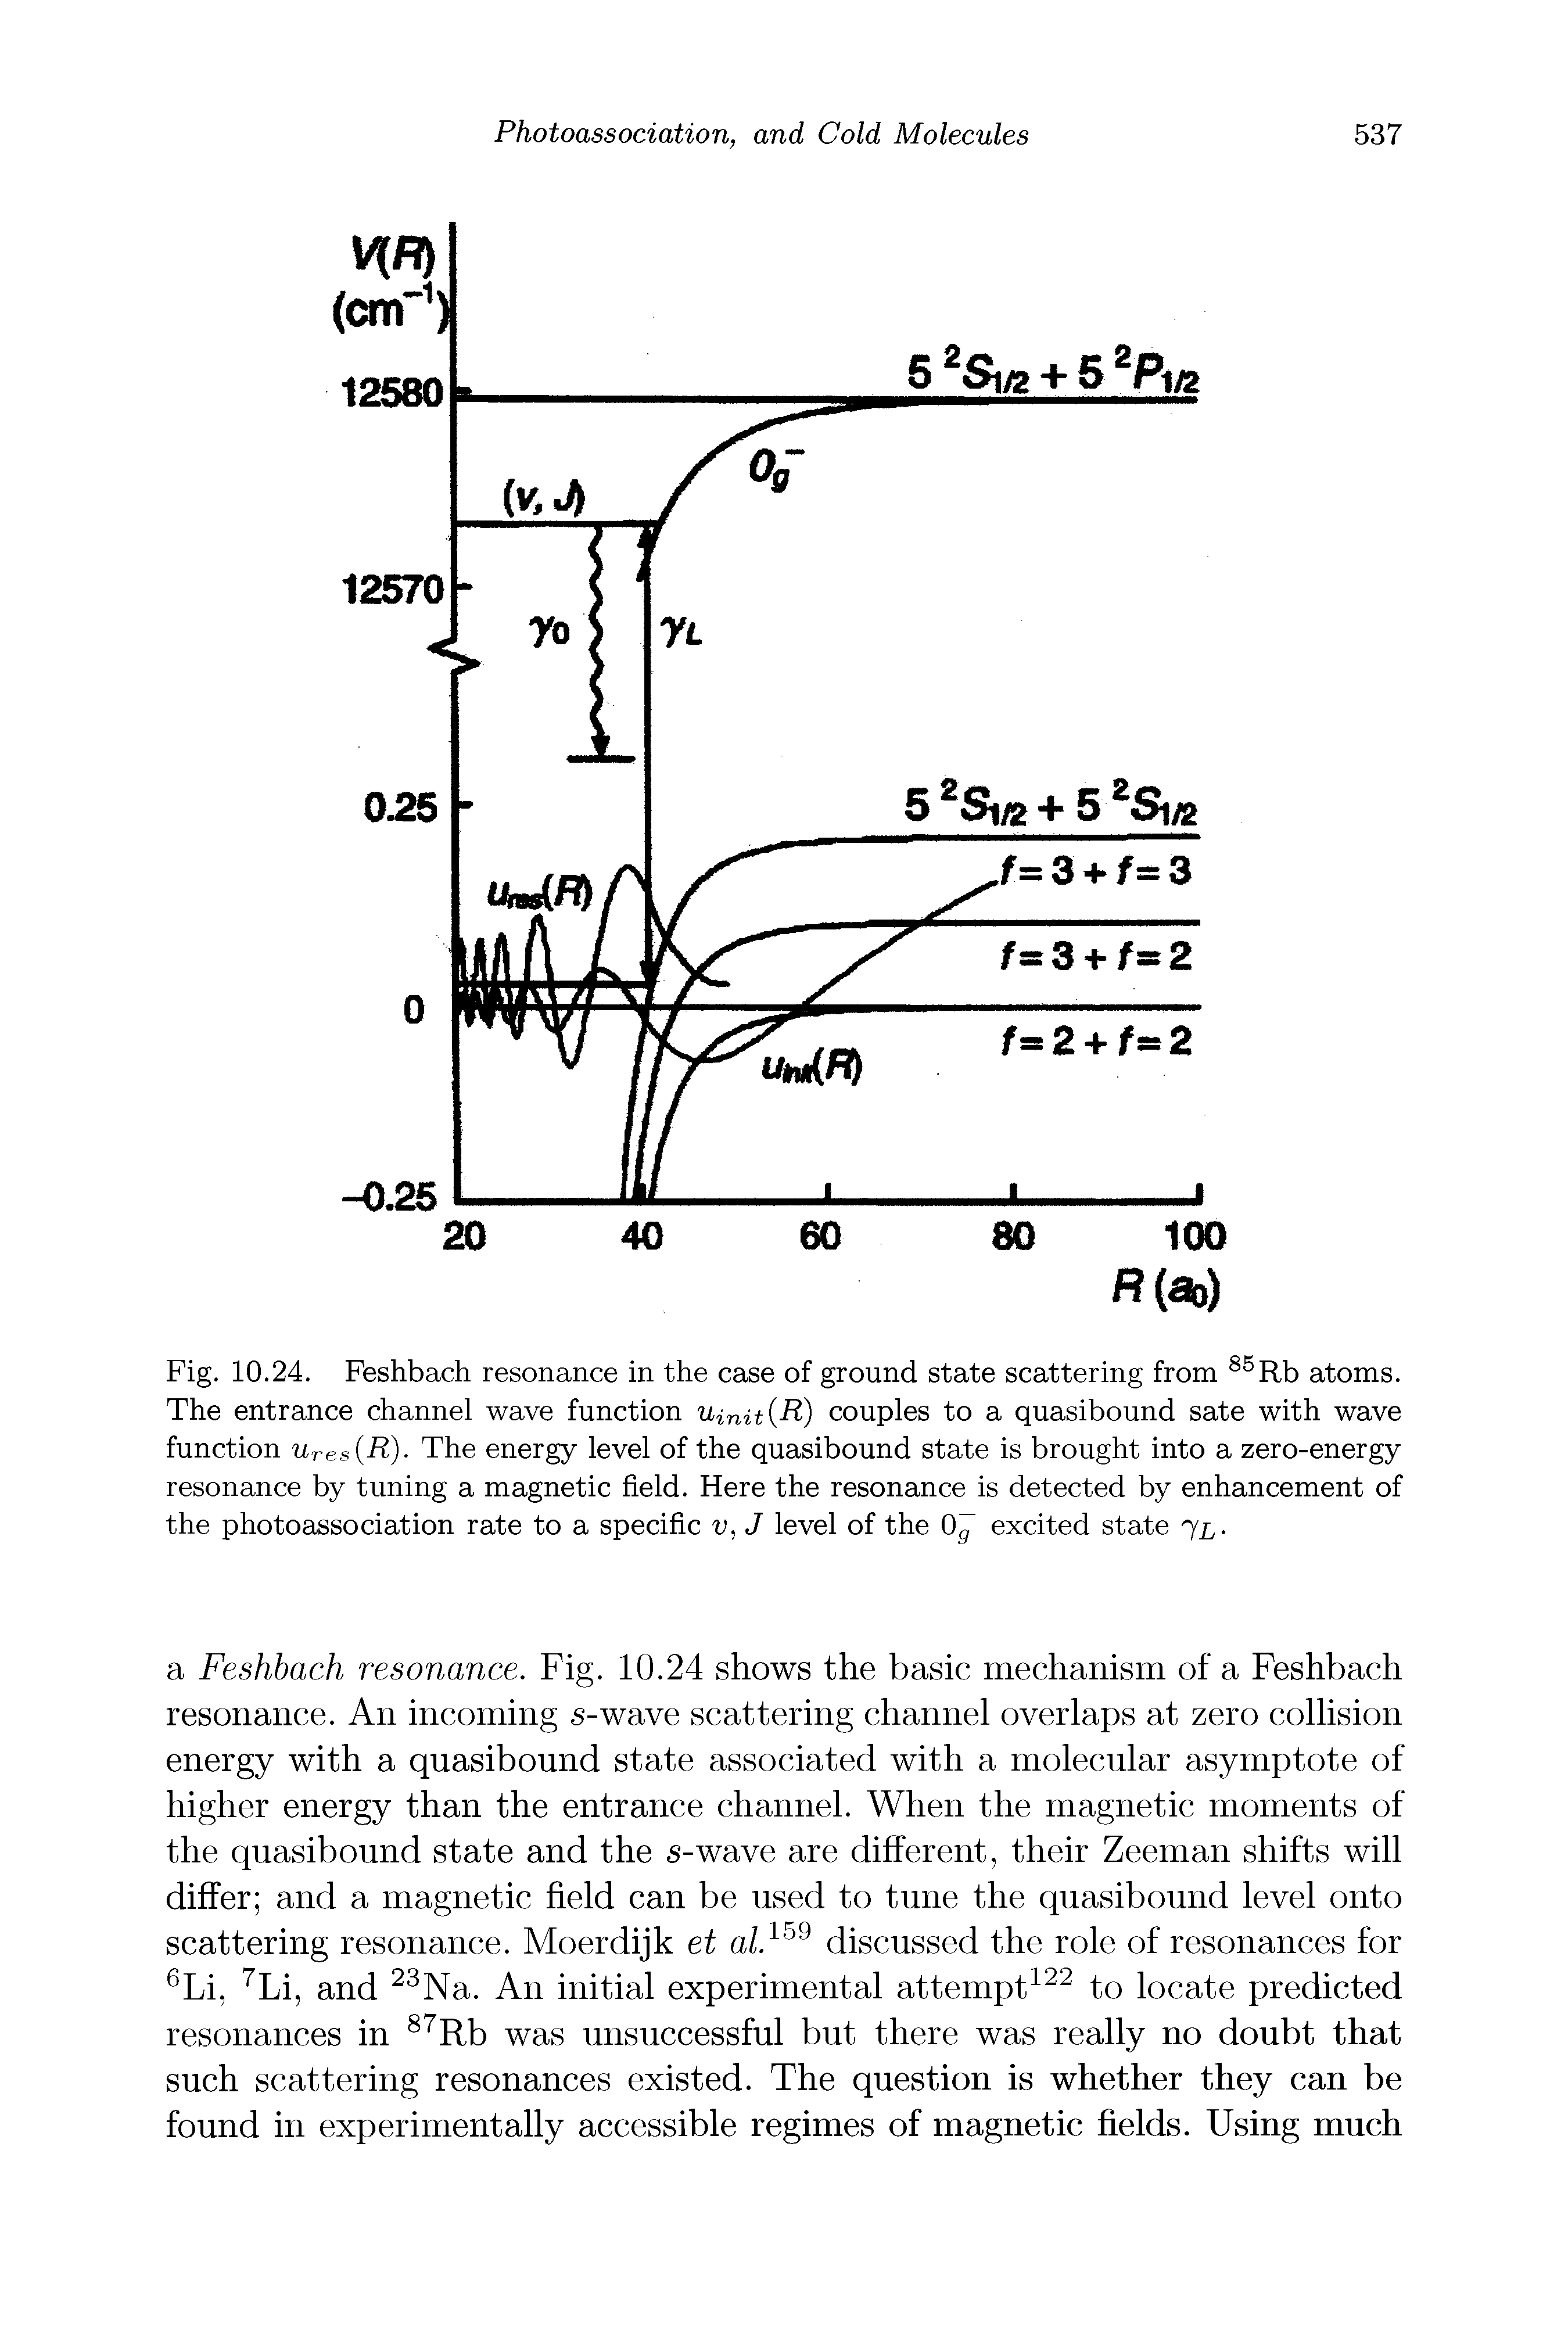 Fig. 10.24. Feshbach resonance in the case of ground state scattering from atoms. The entrance channel wave function Uinit R) couples to a quasibound sate with wave function Ures R)- The energy level of the quasibound state is brought into a zero-energy resonance by tuning a magnetic field. Here the resonance is detected by enhancement of the photoassociation rate to a specific u, J level of the 0 excited state 7l-...